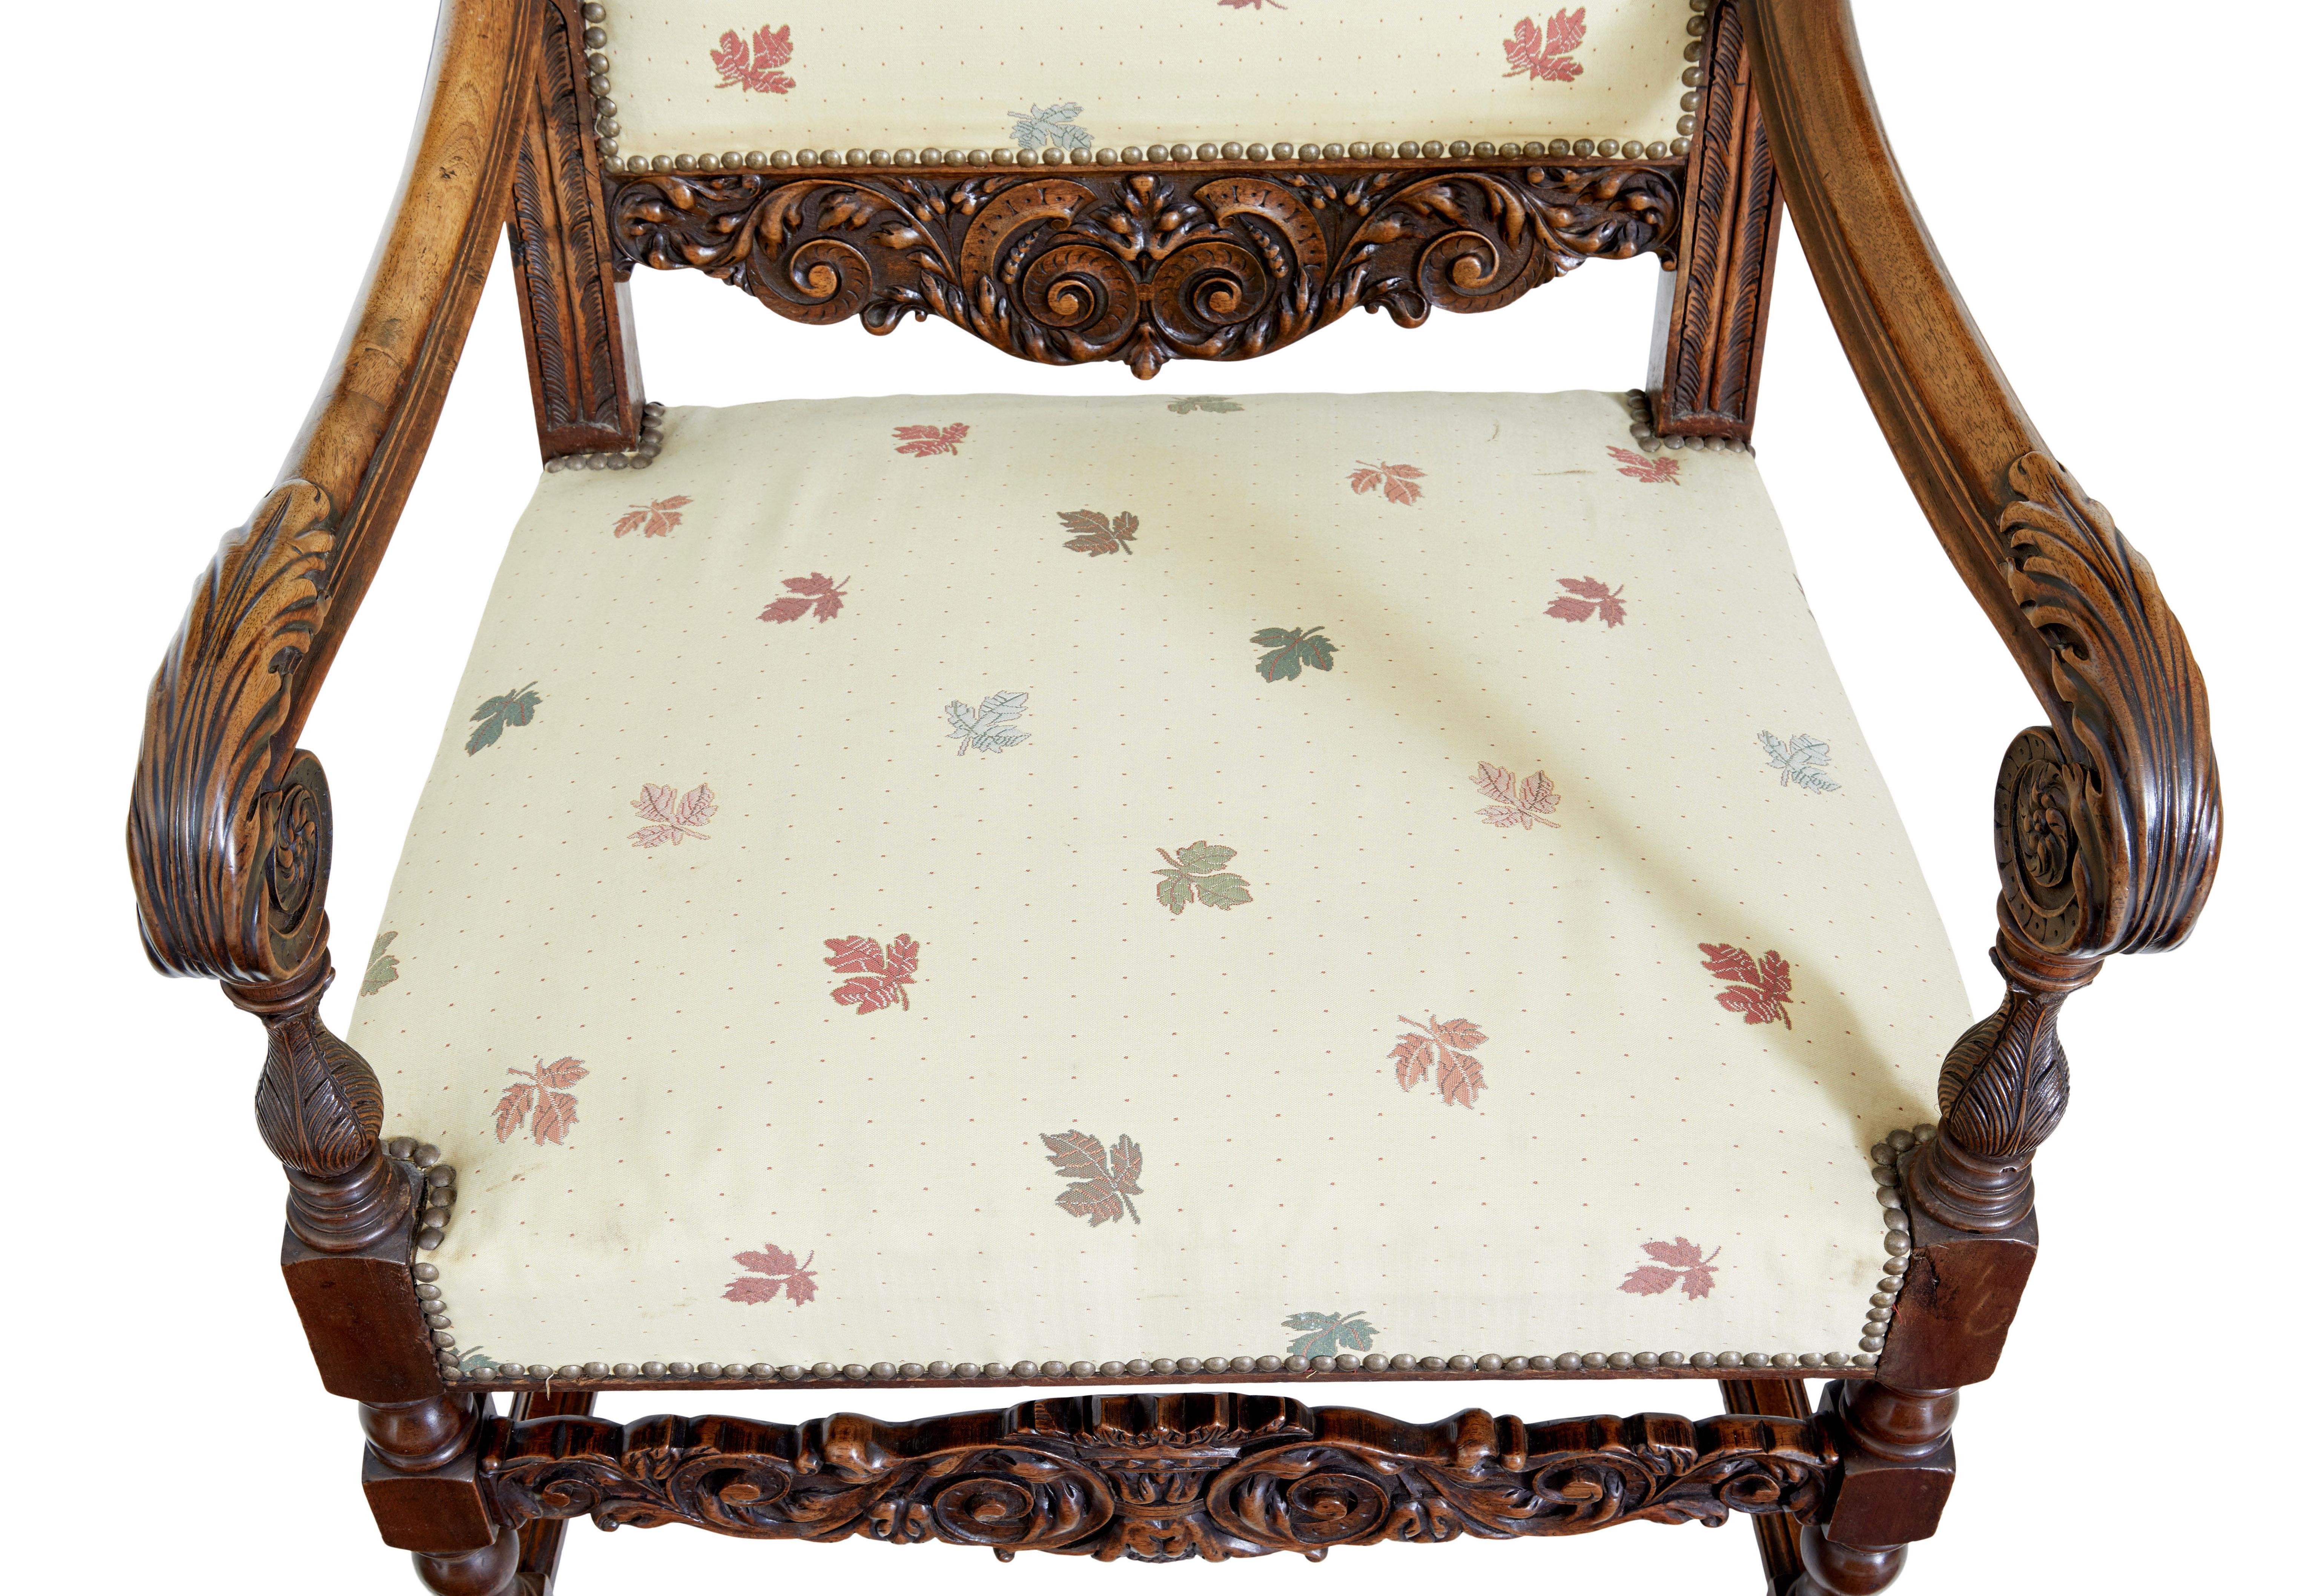 19th century french carved walnut large armchairs, circa 1880.

Elegant pair of 19th century armchairs which are generous in the seat dimensions. Beautifully carved scrolling arms with carved acanthus leaf and roundels. Carved detail in the lower